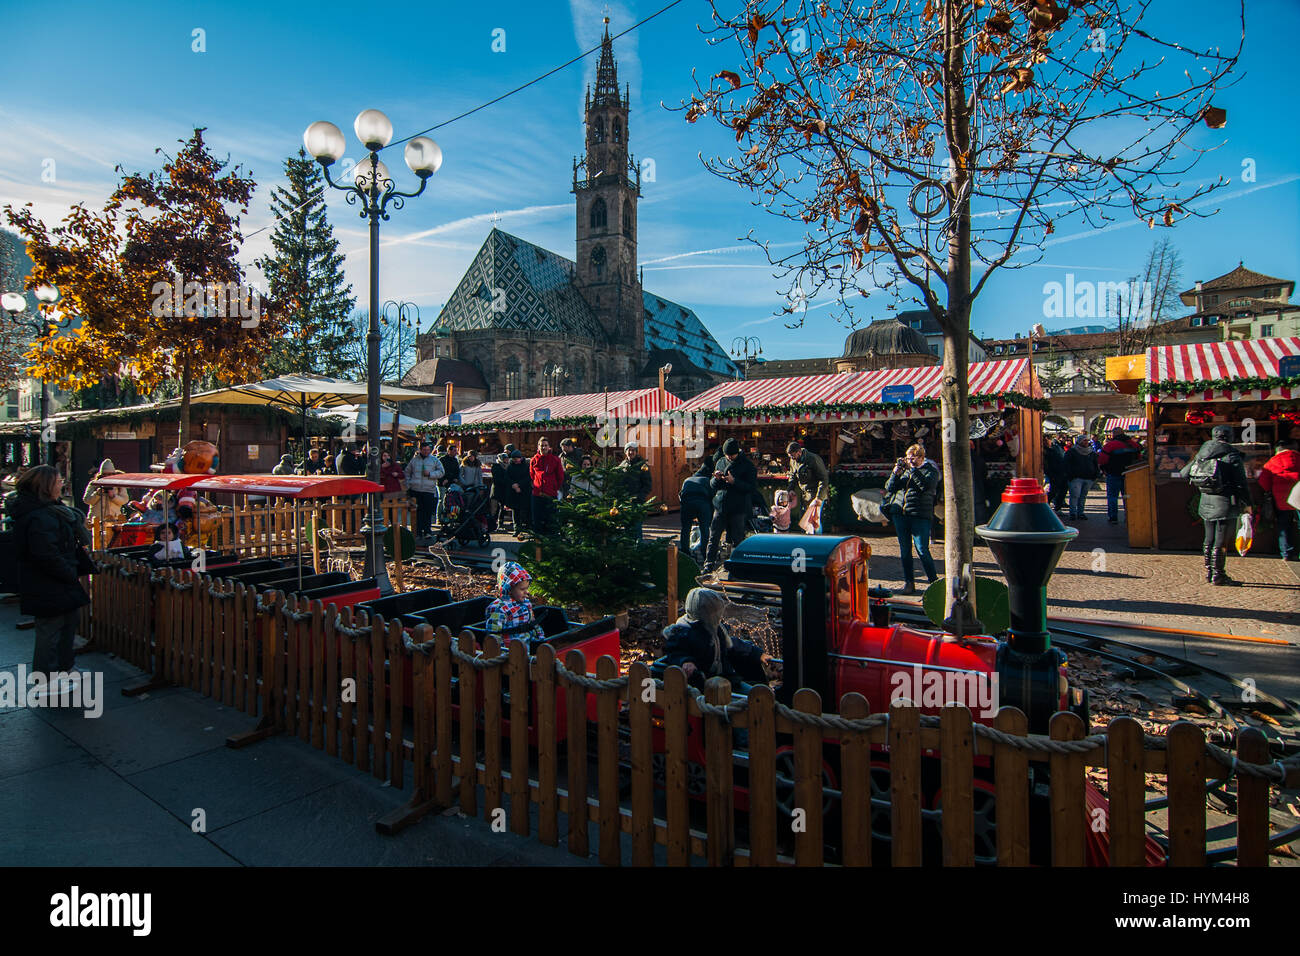 Children play in a small train at the traditional Christmas markets of Bolzano, in Italy. Stock Photo